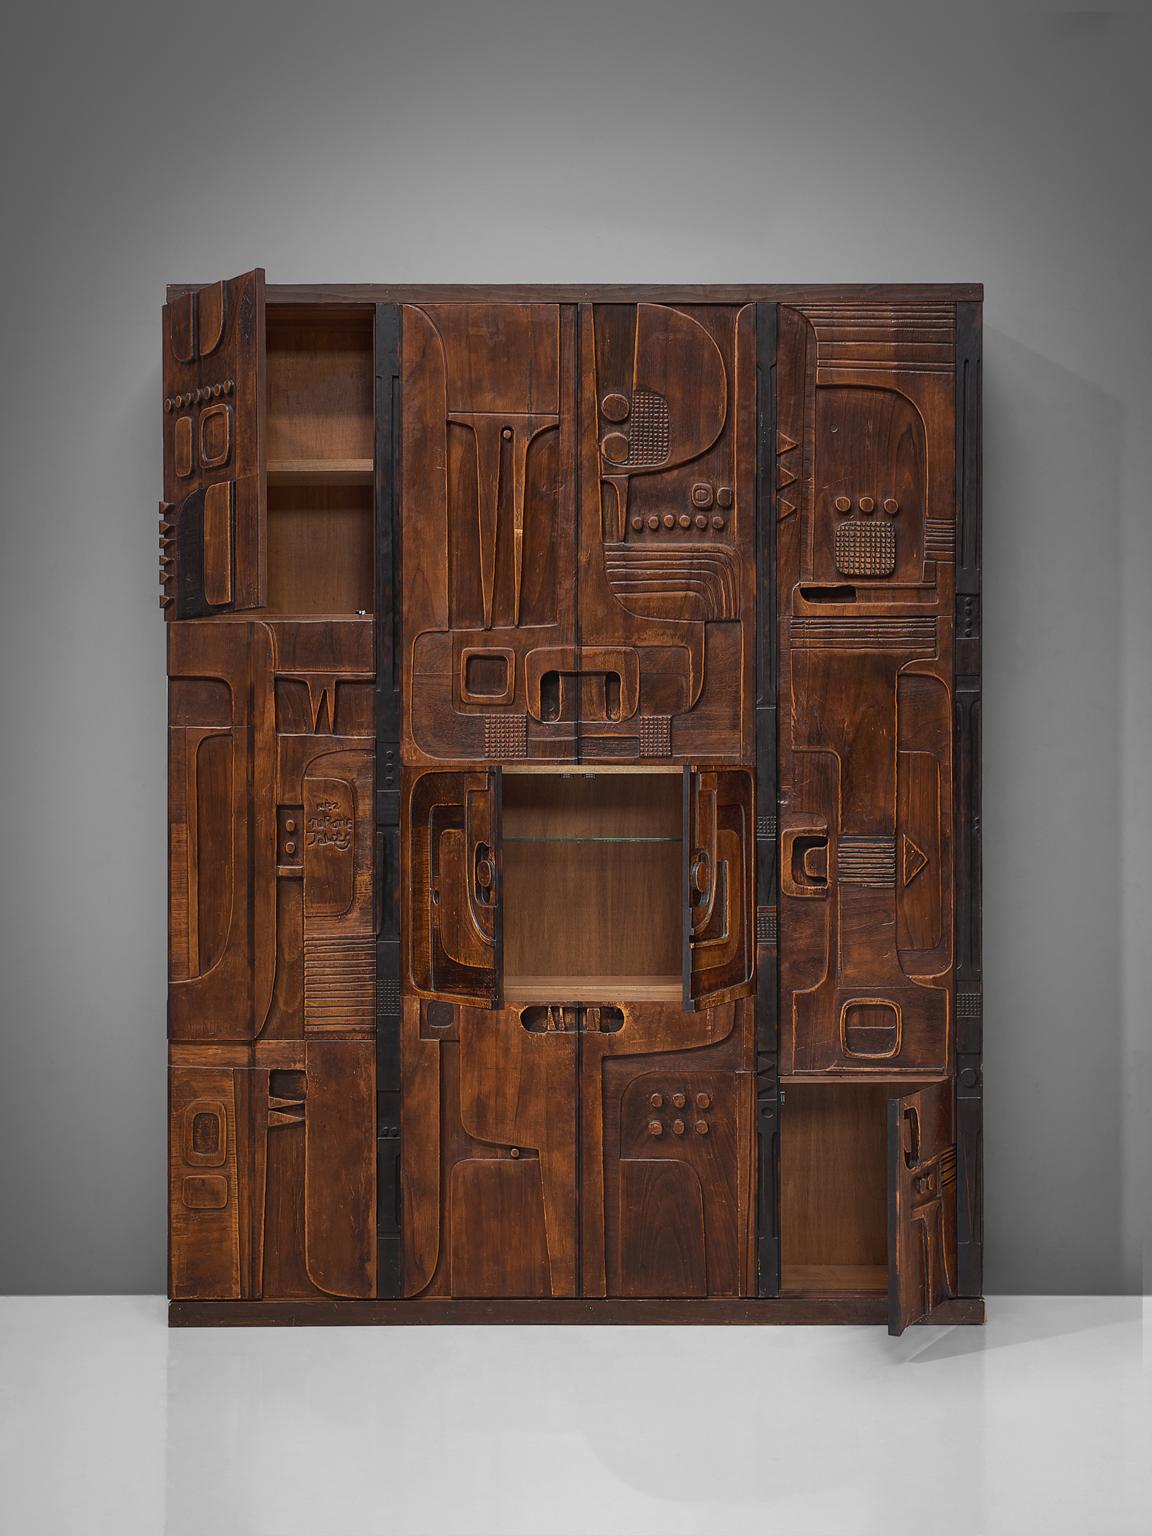 Nerone and Patuzzi for Gruppo NP2, wall unit, walnut wood, Italy, 1970s

This extraordinary large cabinet is designed by Nerone and Patuzzi for Gruppo NP2. The Abstract Constructivist sideboard features high relief doors, which are composed of